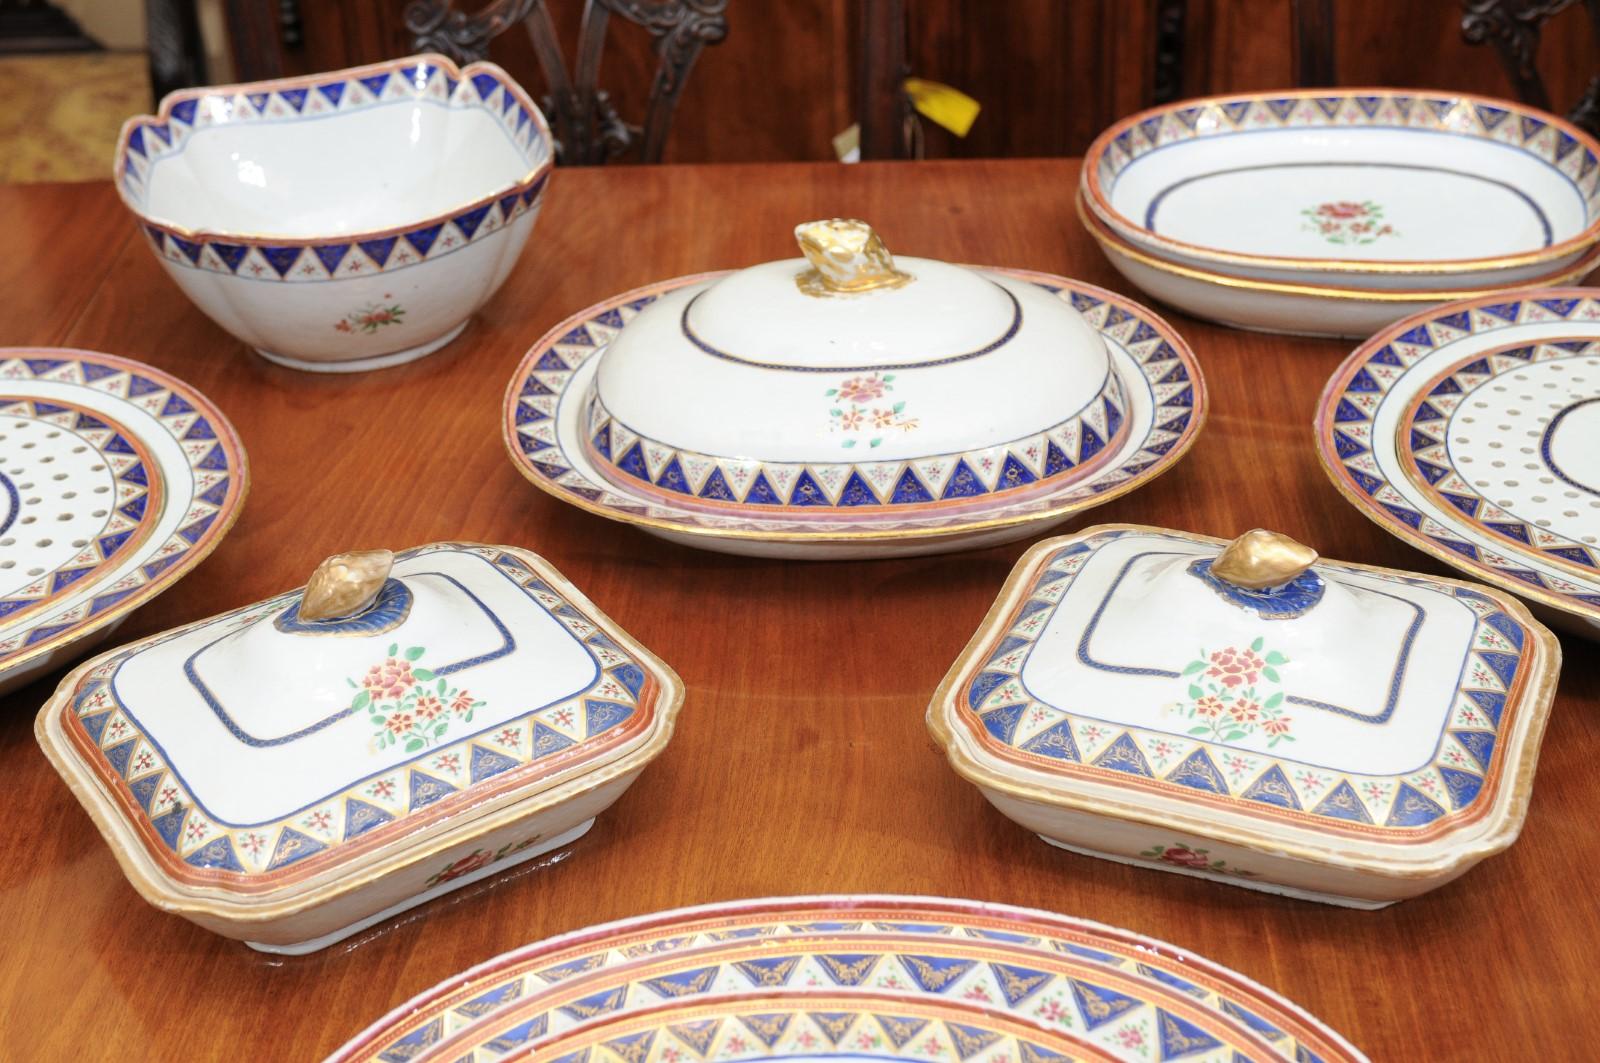 19th C. Chinese Export Famille Rose Porcelain Part-Dinner Service, 45 Piece Set In Good Condition For Sale In Atlanta, GA